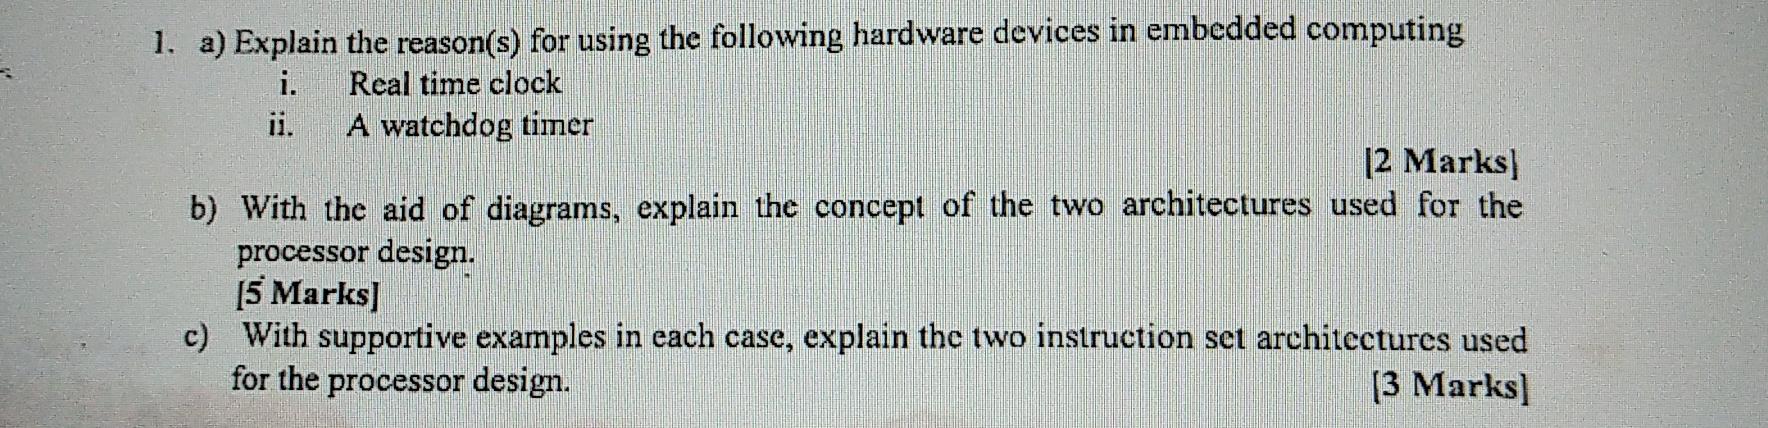 1. a) Explain the reason(s) for using the following hardware devices in embedded computing Real time clock i.